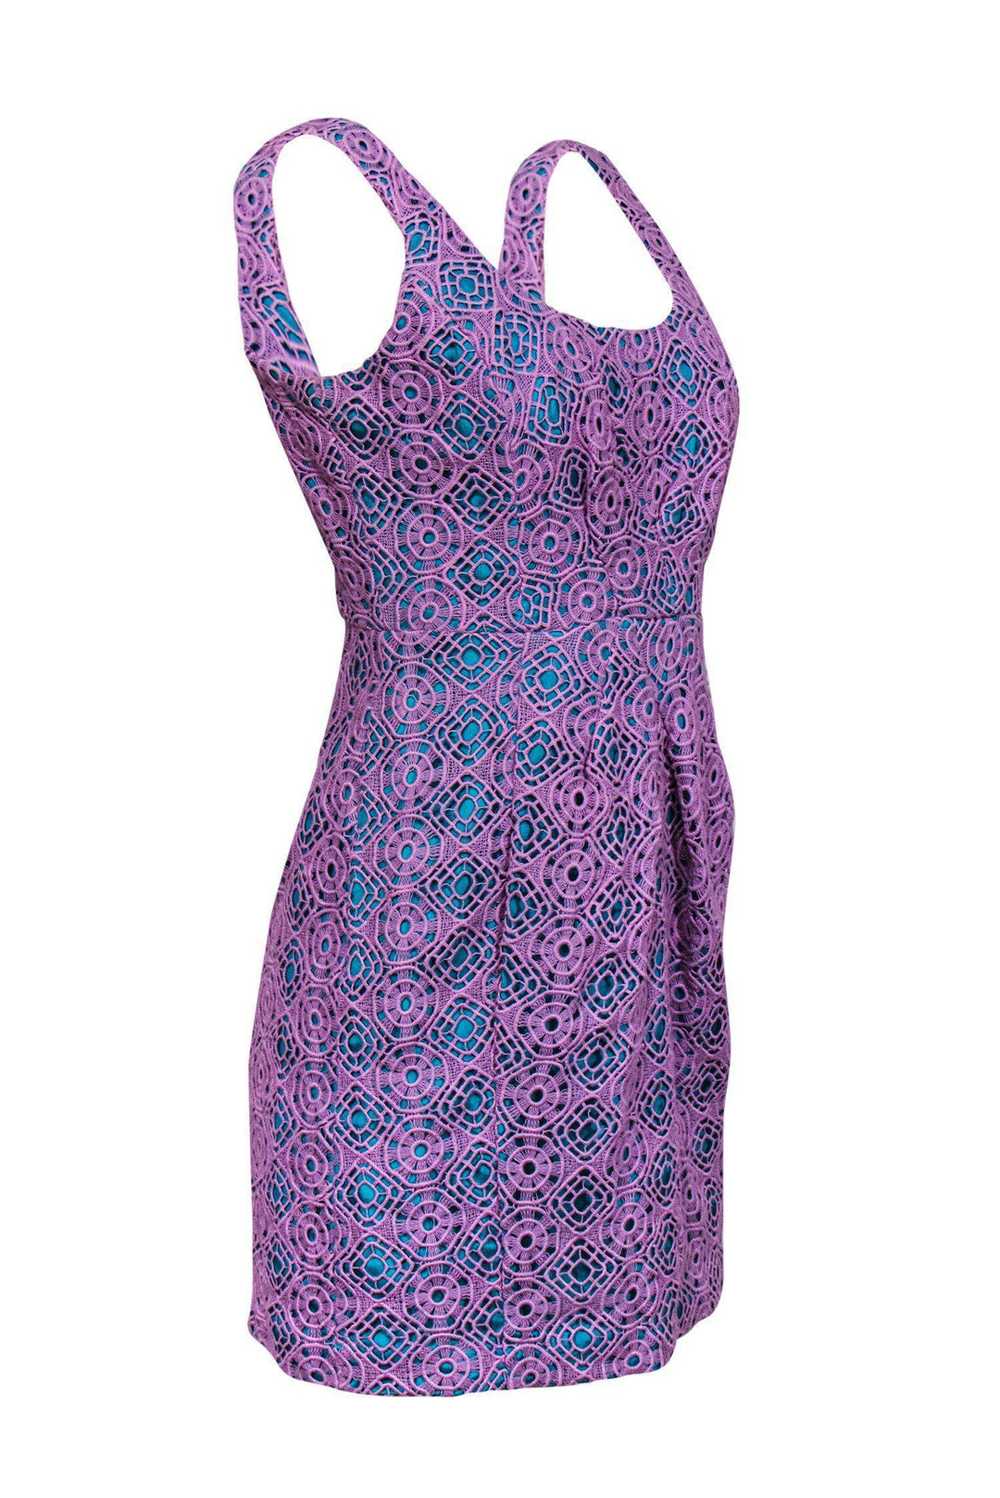 Tracy Reese - Purple & Teal Lace Dress Sz 6 - image 2